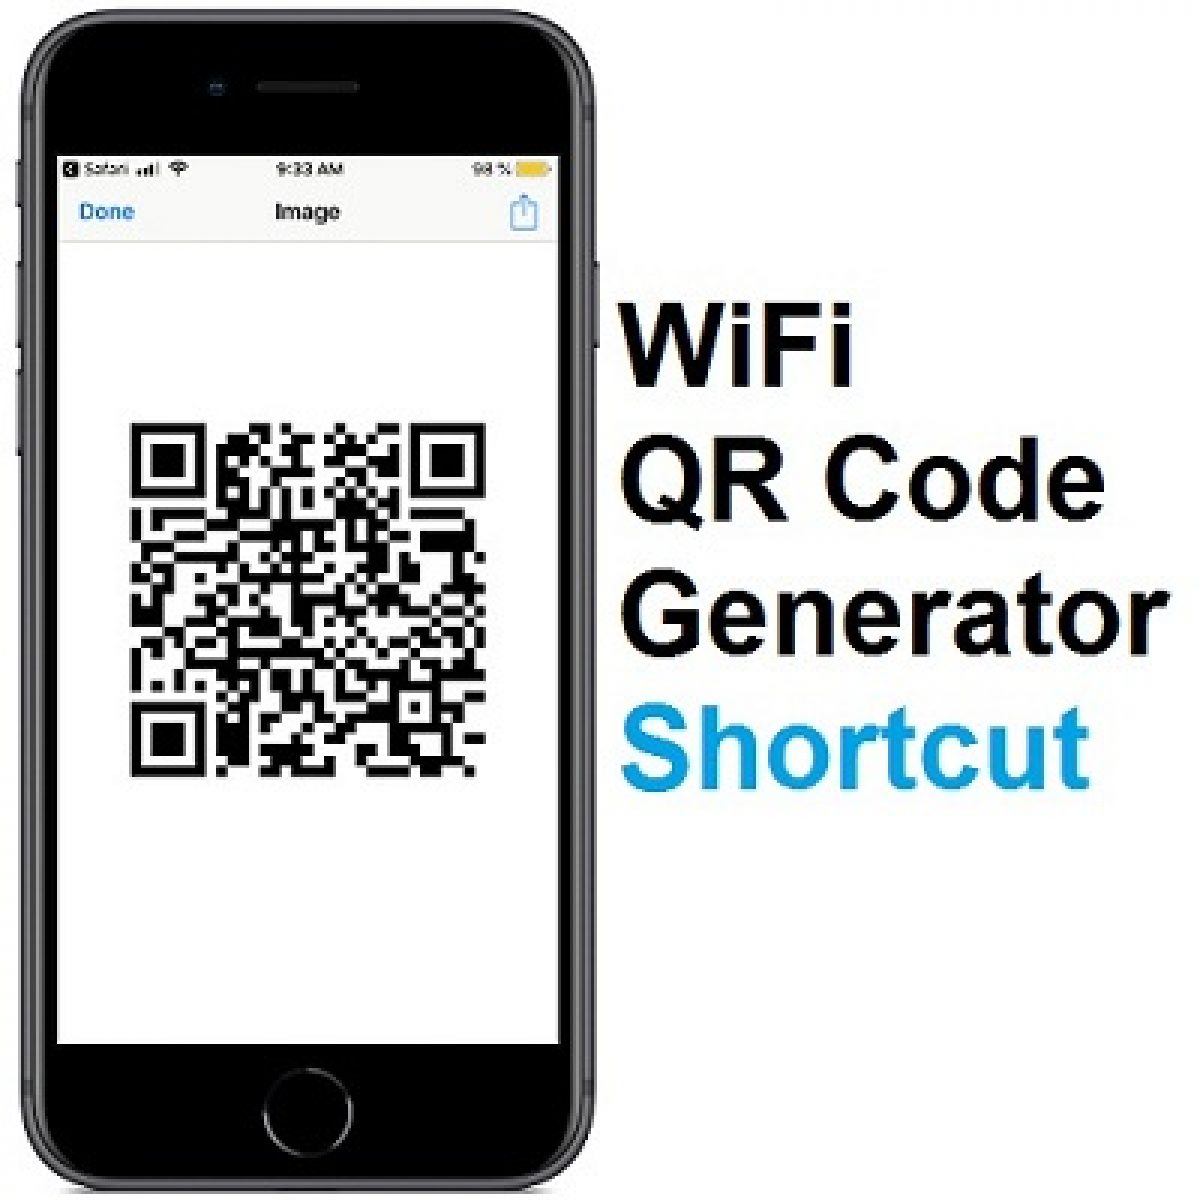 Ios 12 Shortcut For Creating A Qr Code With The Log-In Details Of Your Wifi  Hotspot